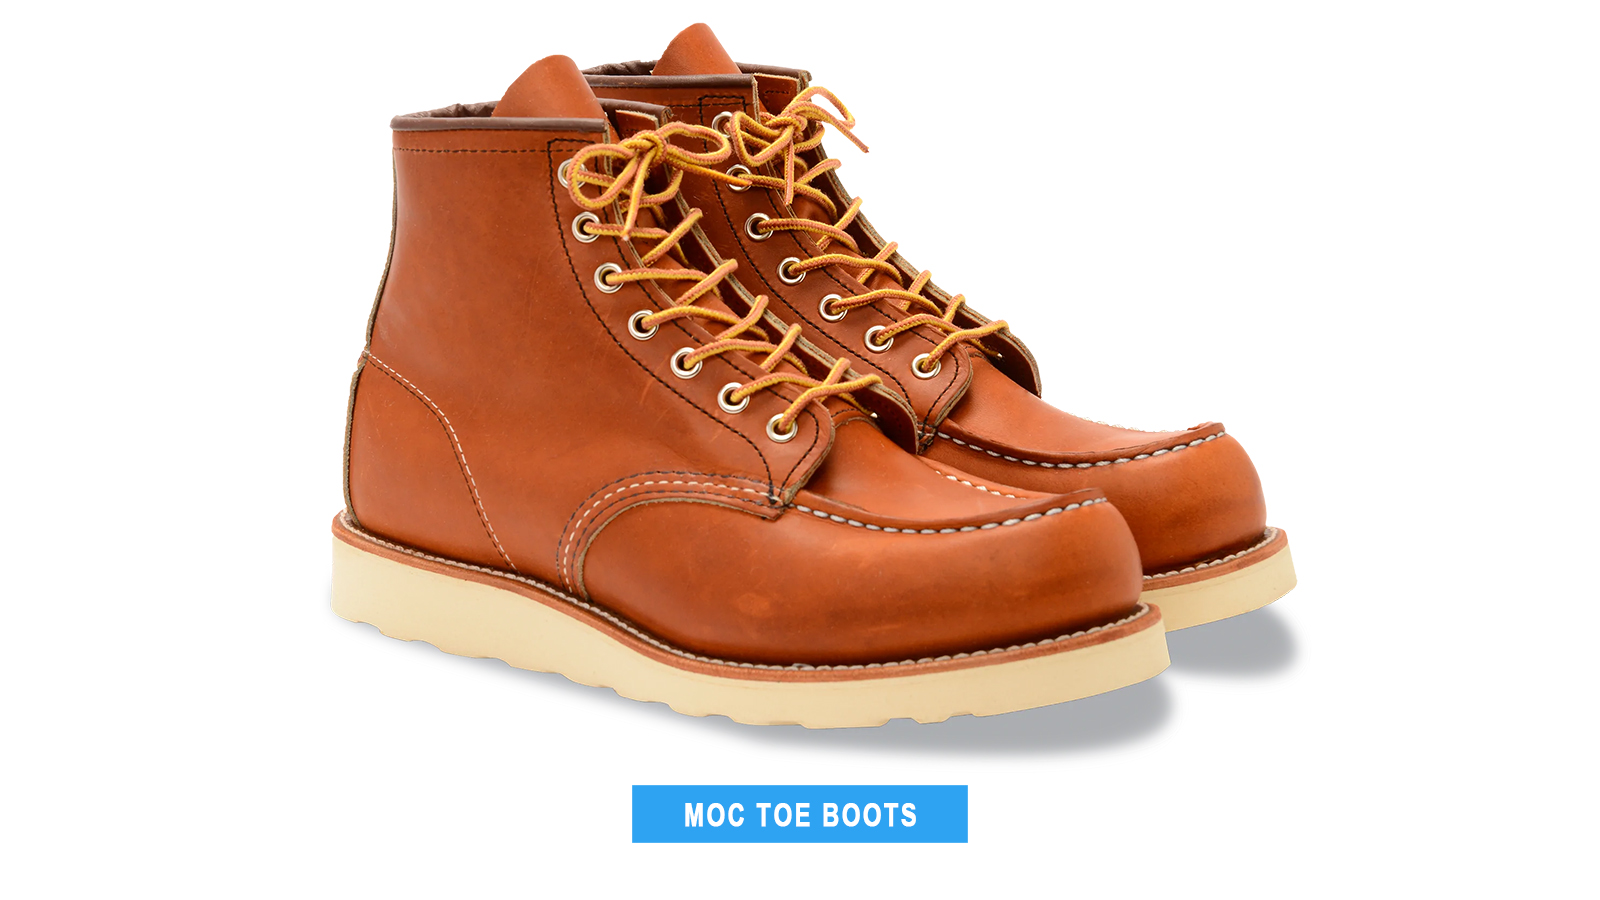 Moc Toe boot style for men